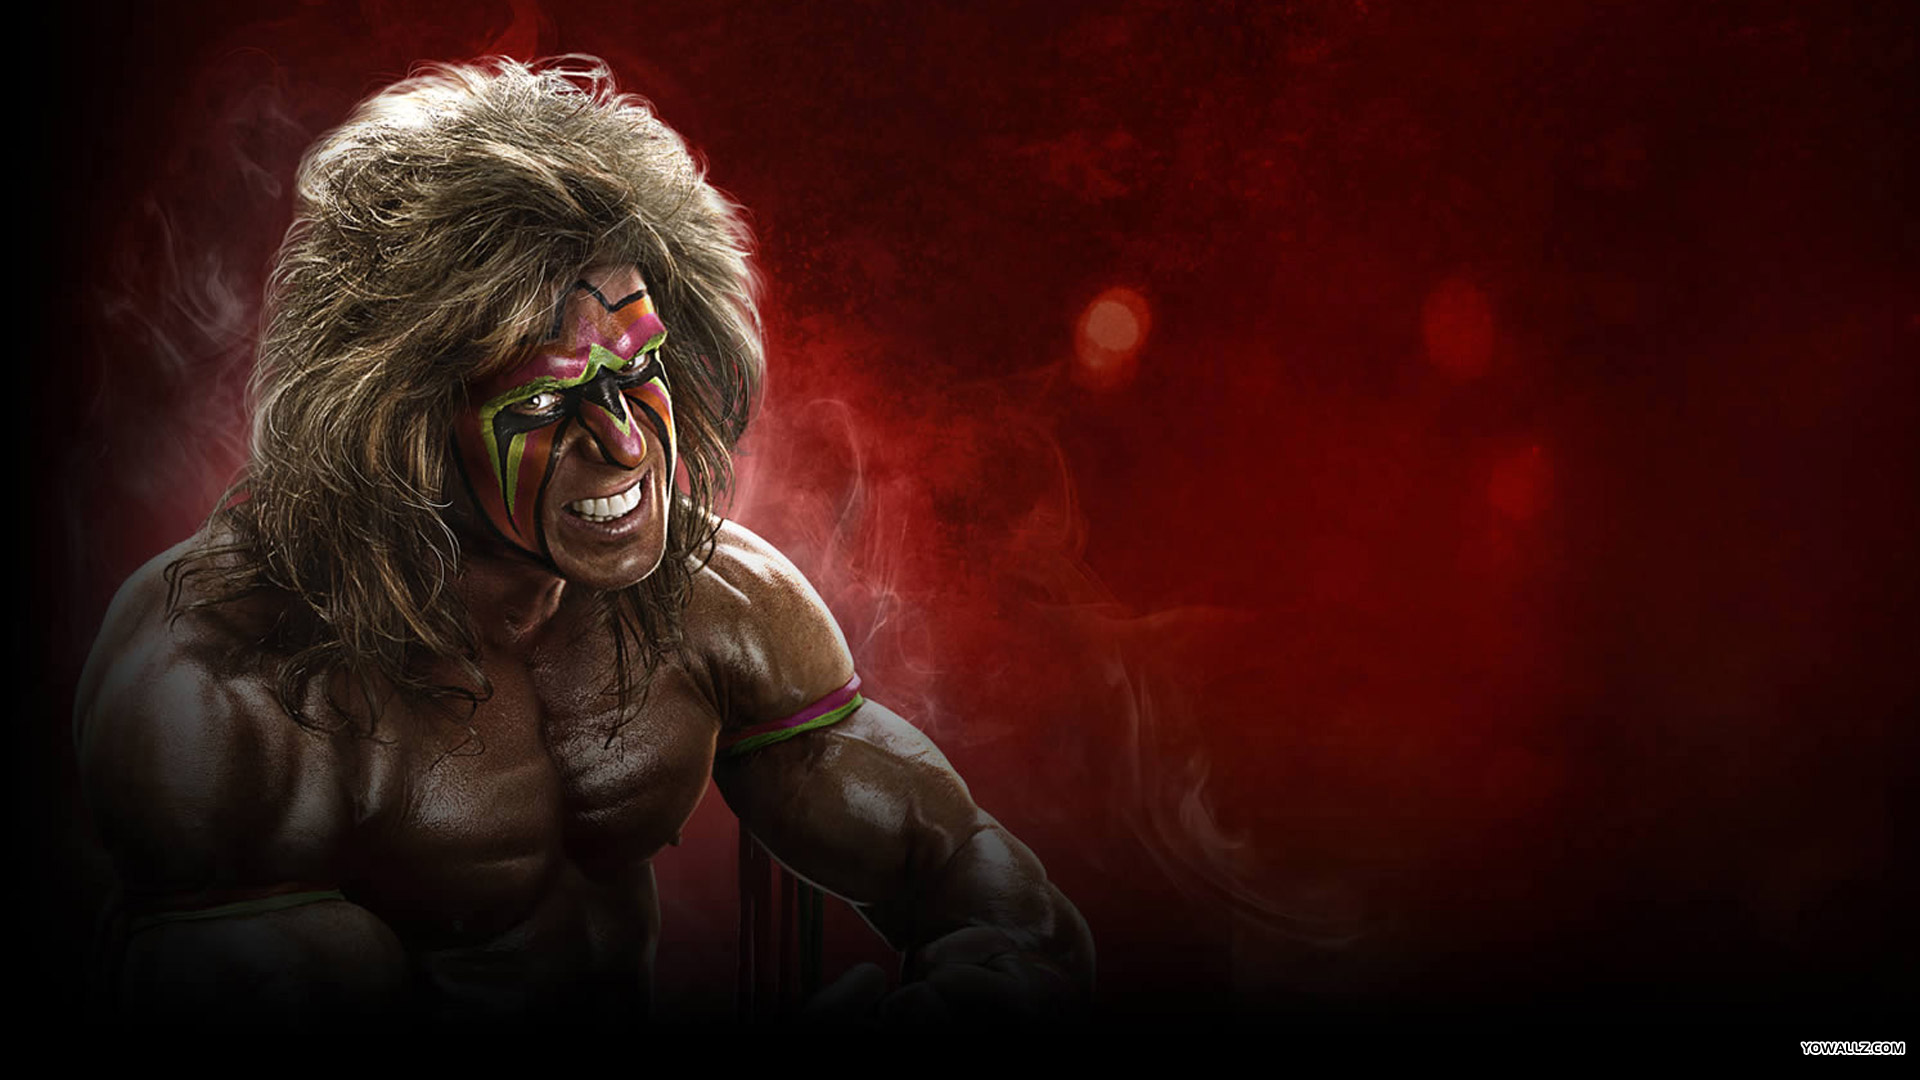 Download The Ultimate Warrior WWE 2K14 HD Wallpapers 6417 Full Size